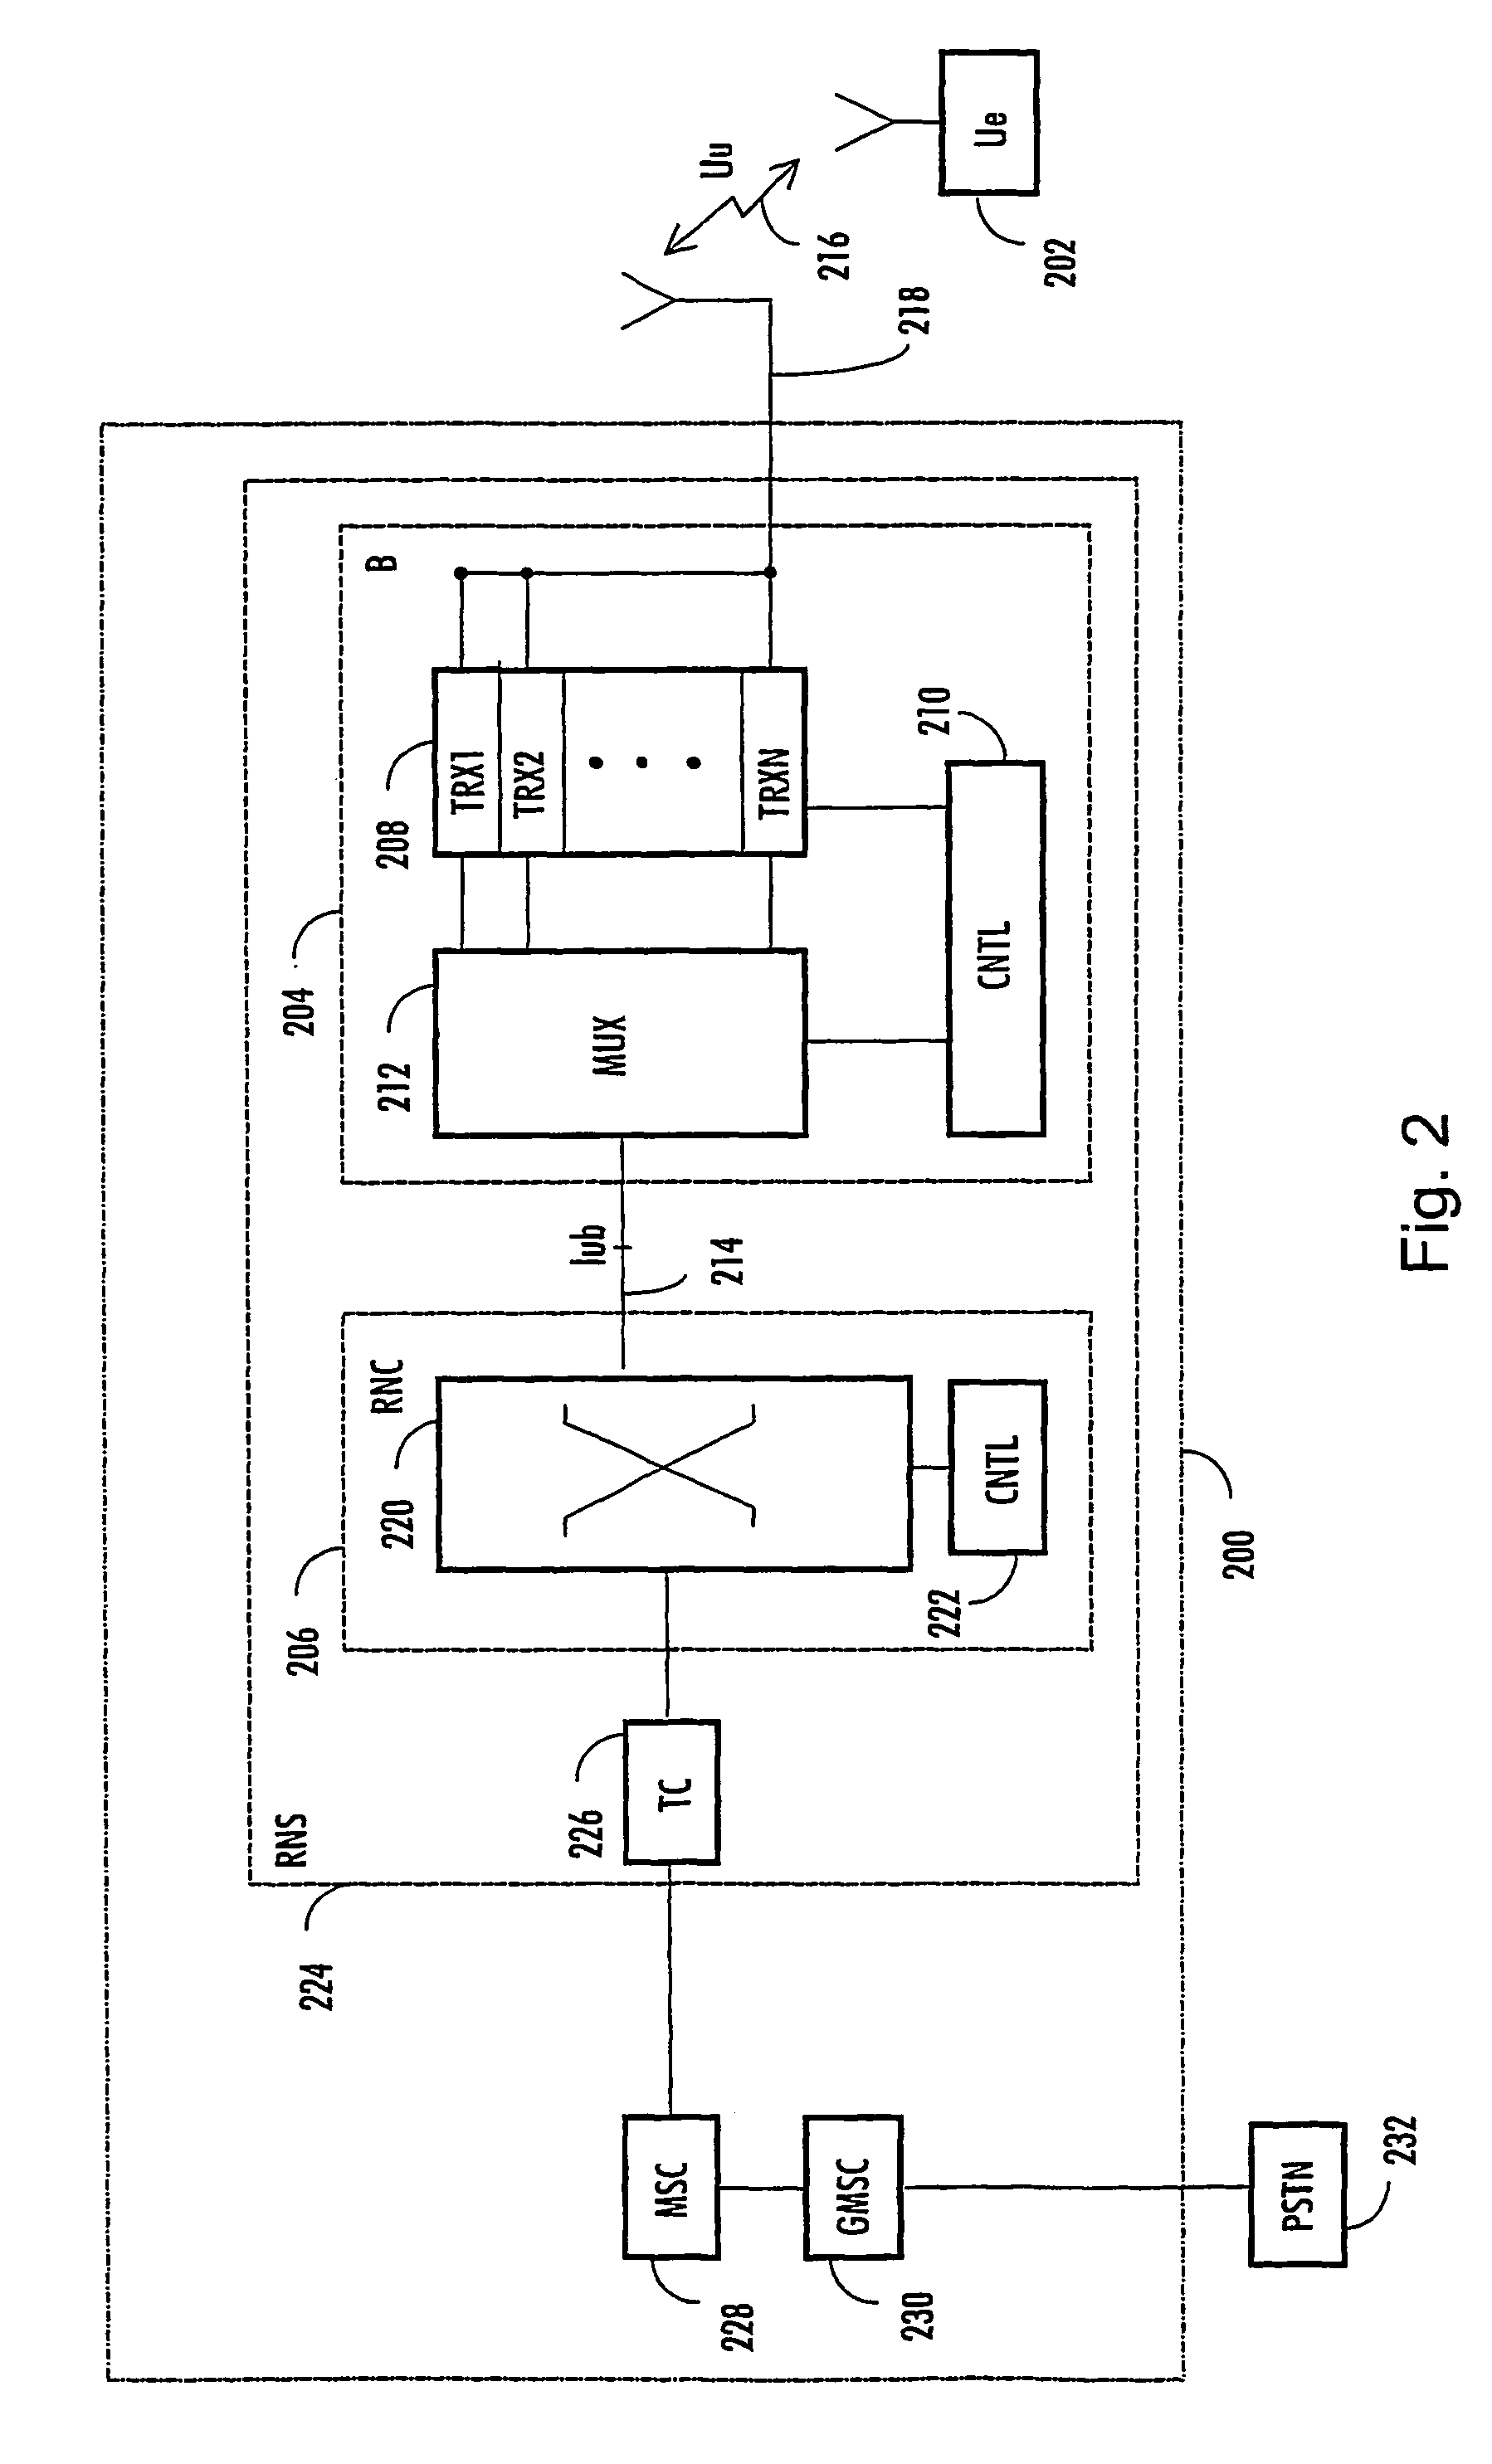 Method for limiting signal and transmitter